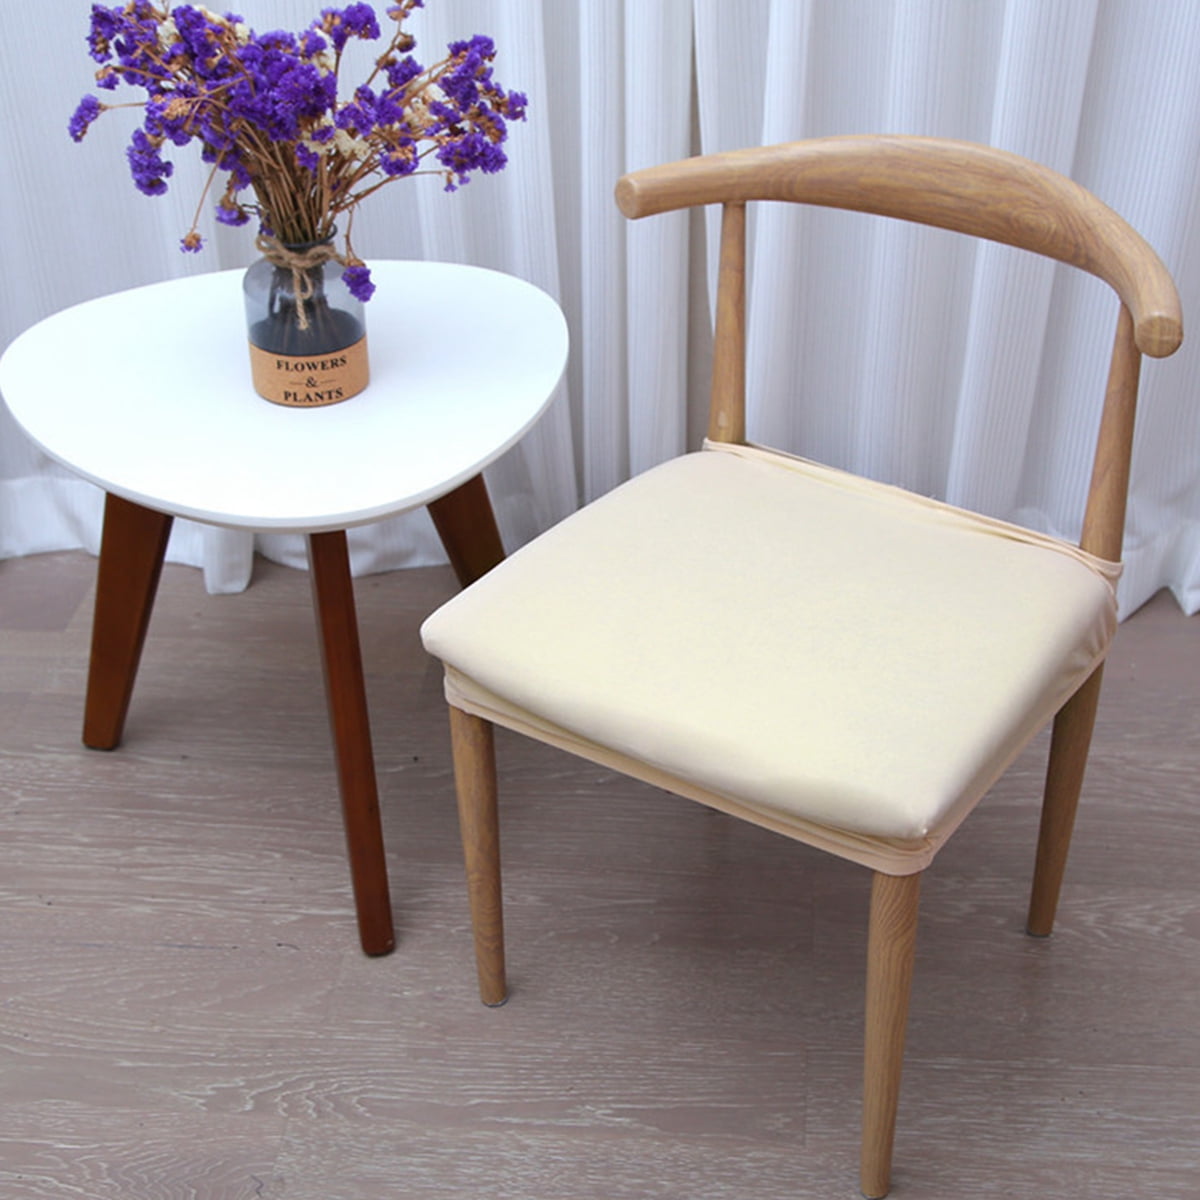 Stretchy Dining Chair Seat Covers Removable Washable Chair Seat Cover